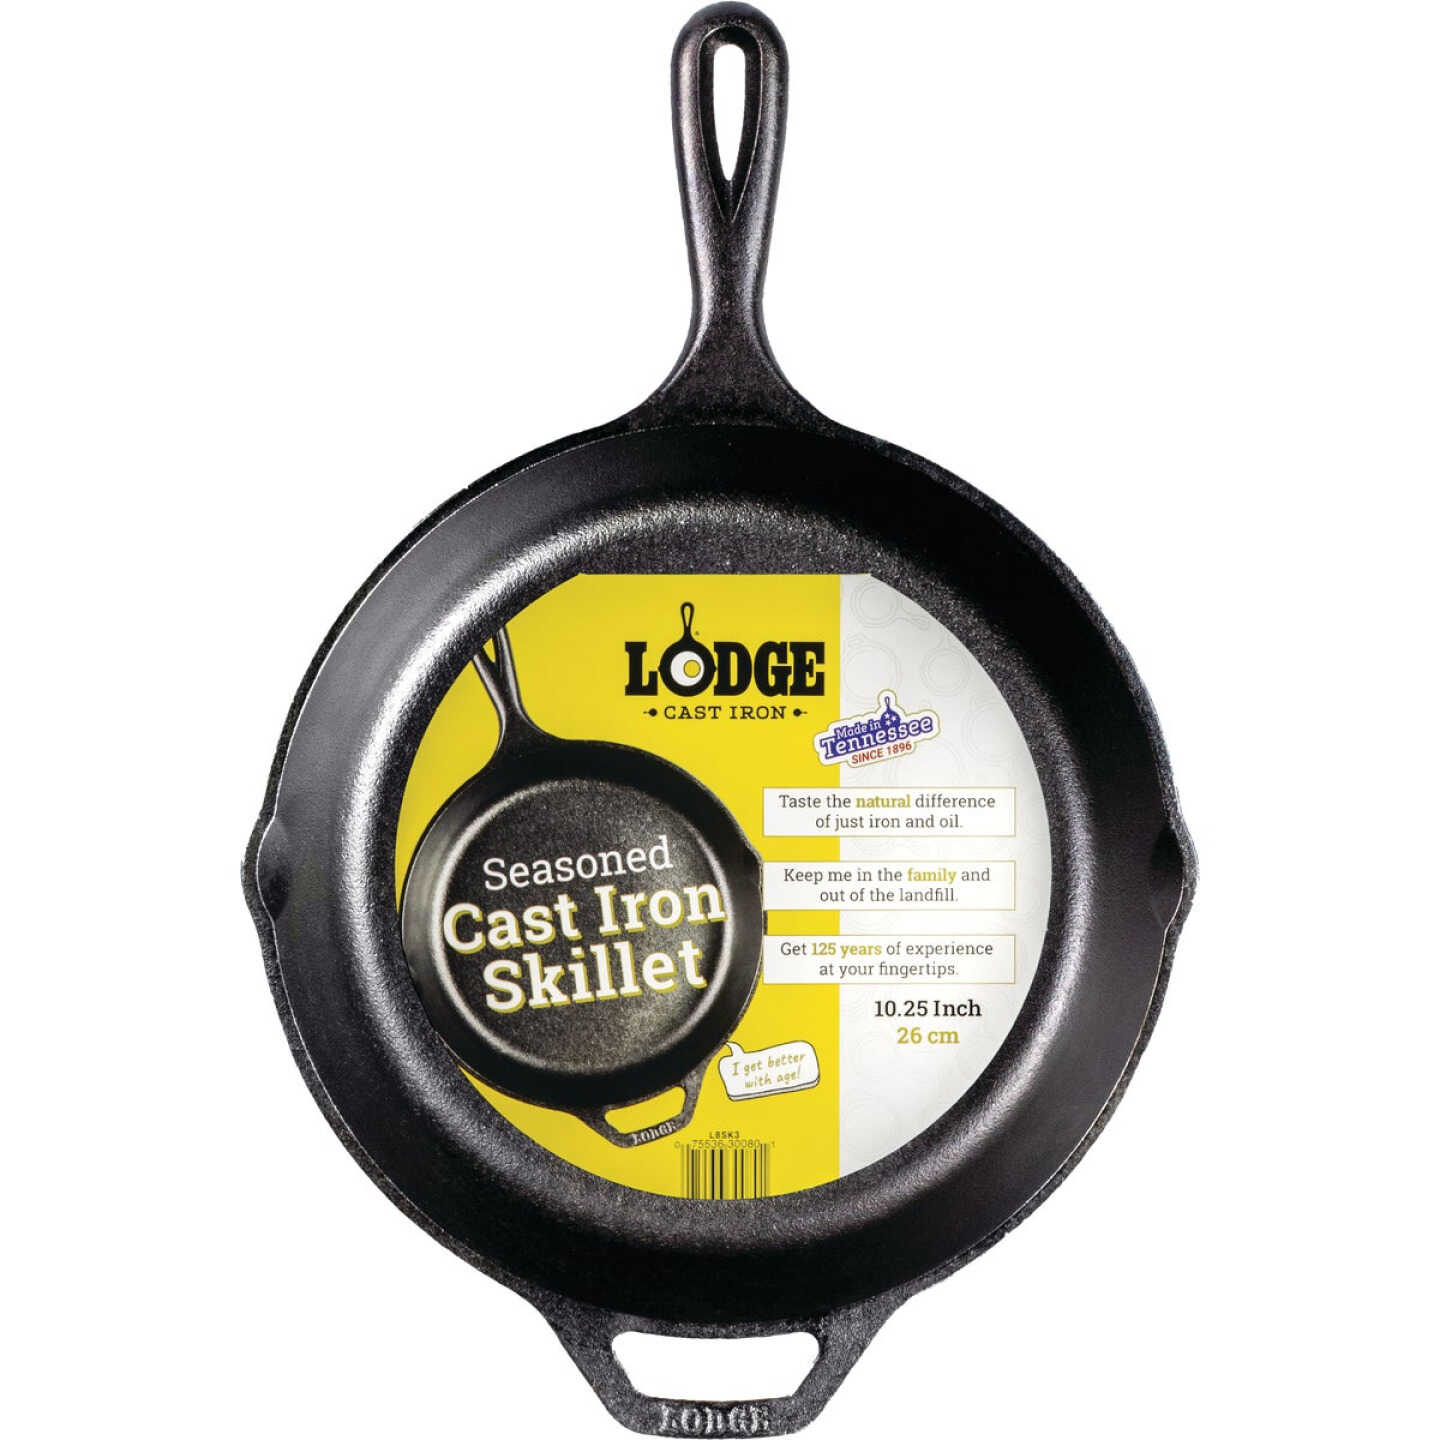 Lodge 10.25 In. Dual Handle Cast Iron Skillet